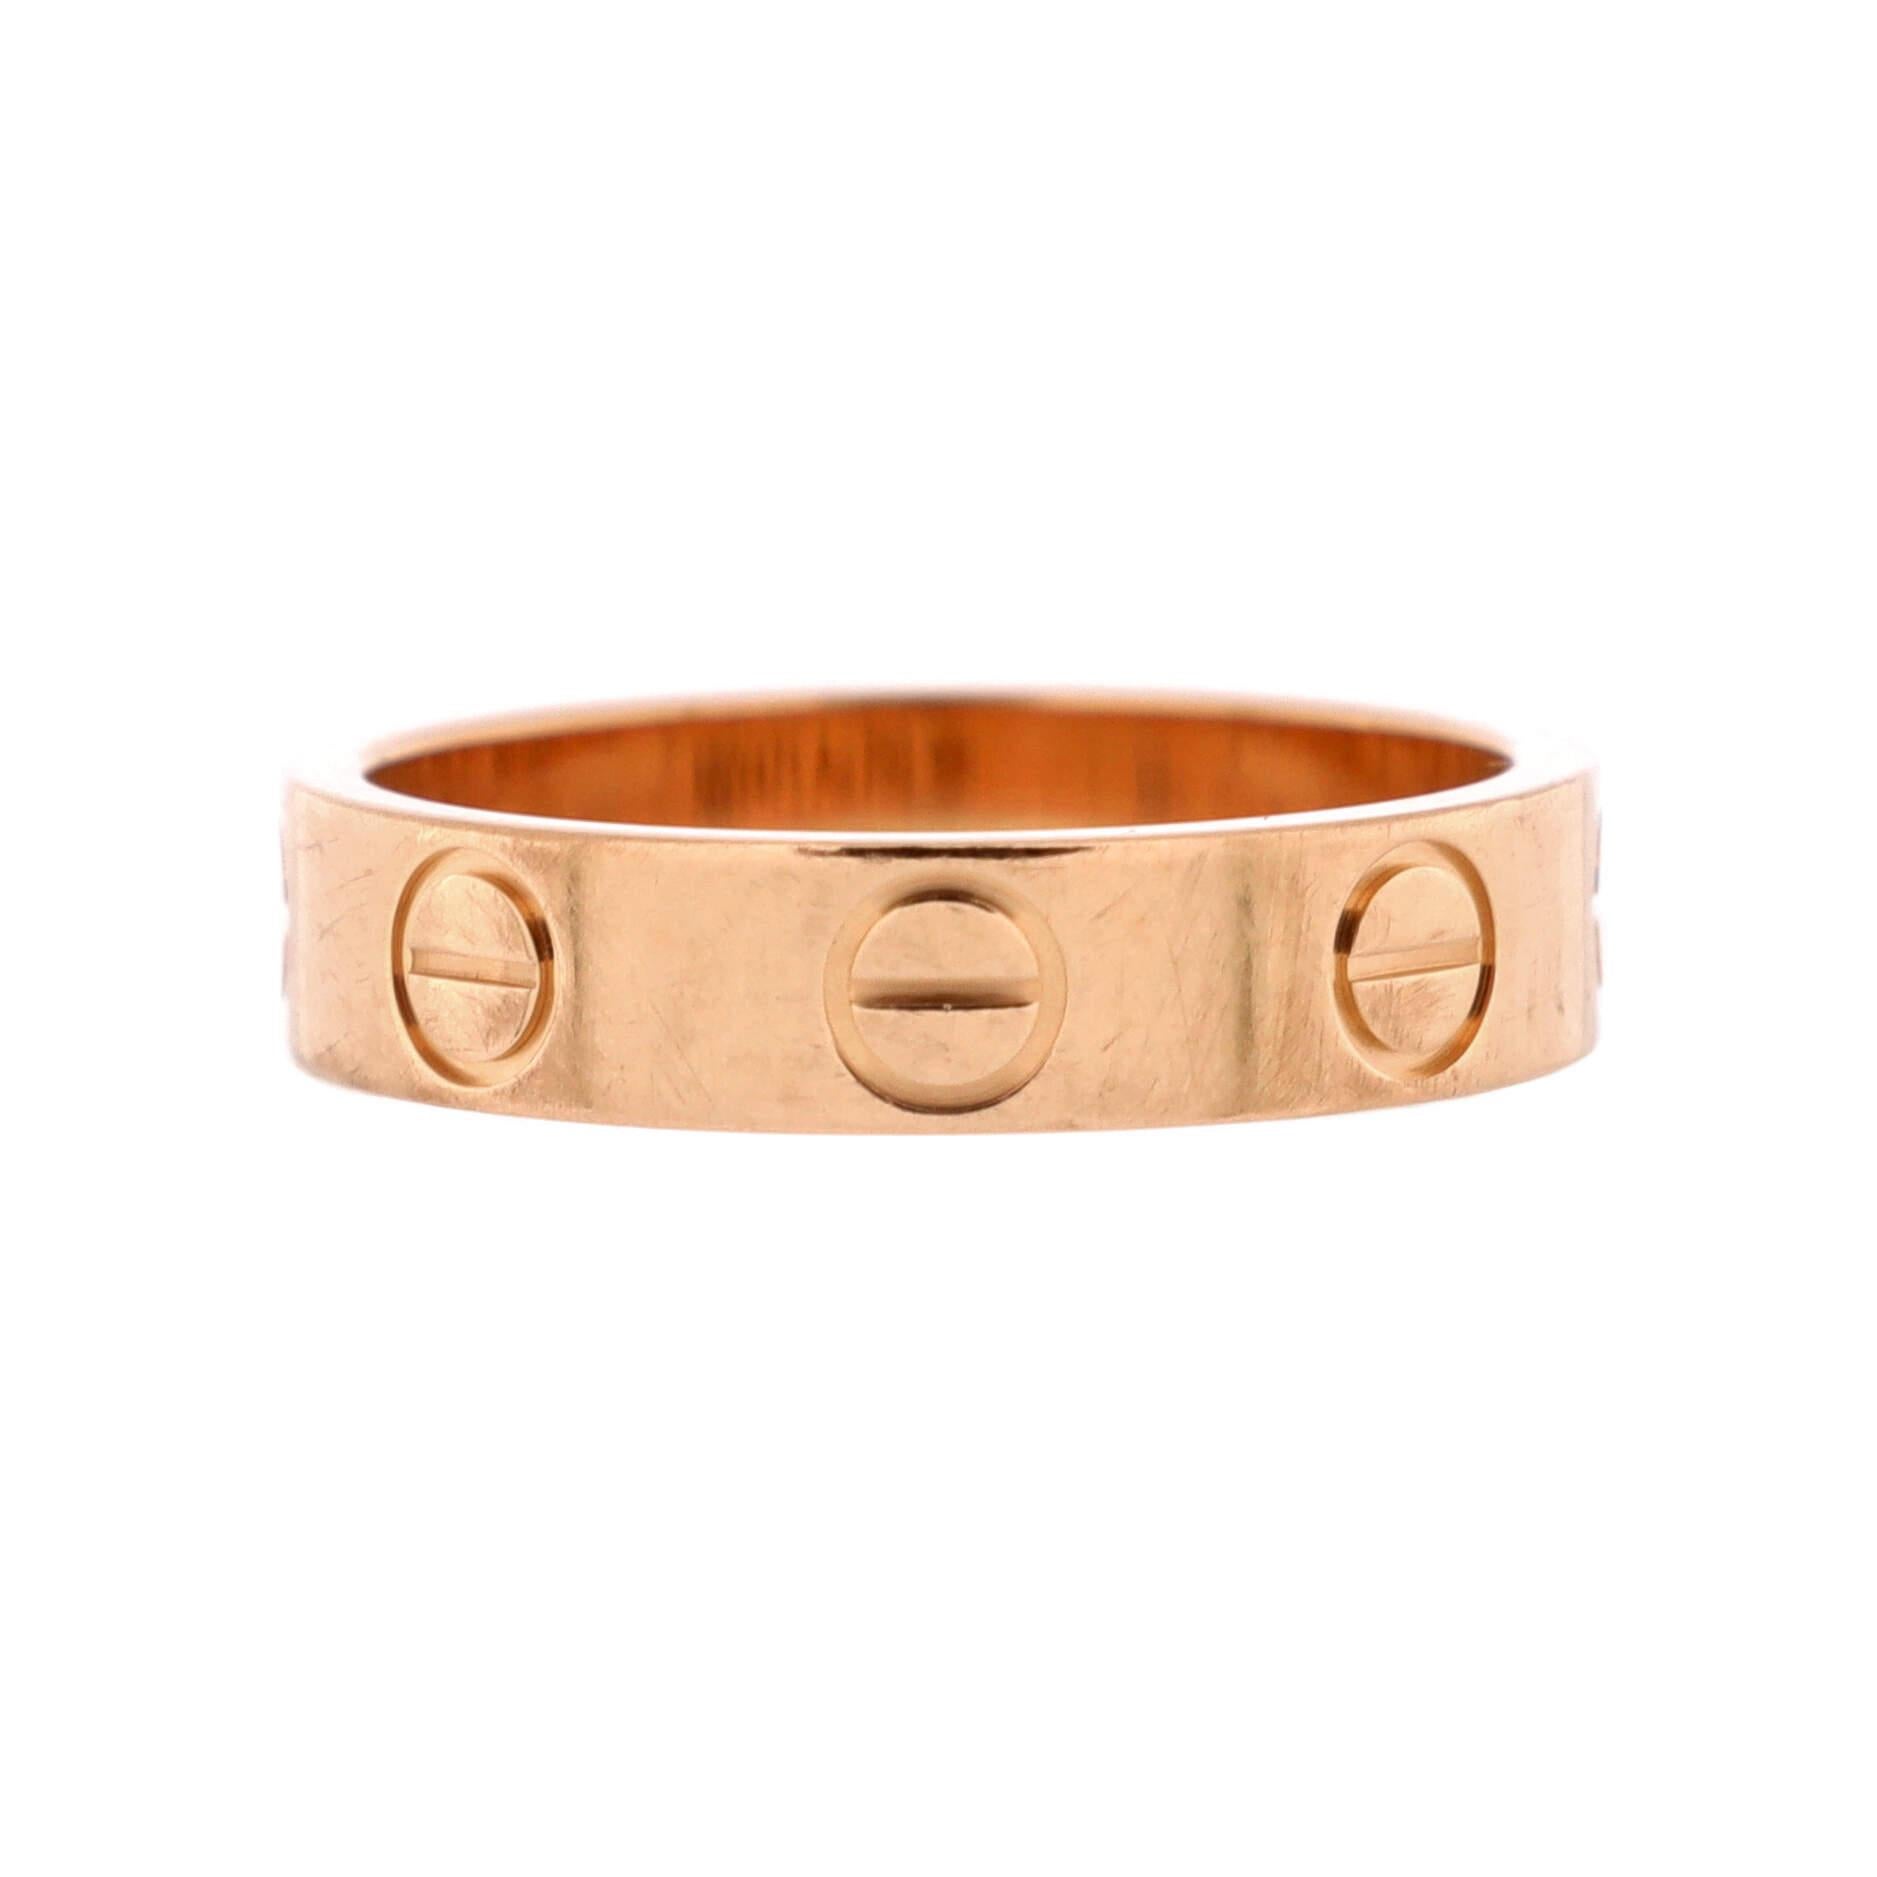 Condition: Very good. Moderate wear throughout.
Accessories: No Accessories
Measurements: Size: 3.75 - 46, Width: 3.60 mm
Designer: Cartier
Model: Love Wedding Band Ring 18K Rose Gold
Exterior Color: Rose Gold
Item Number: 218195/1